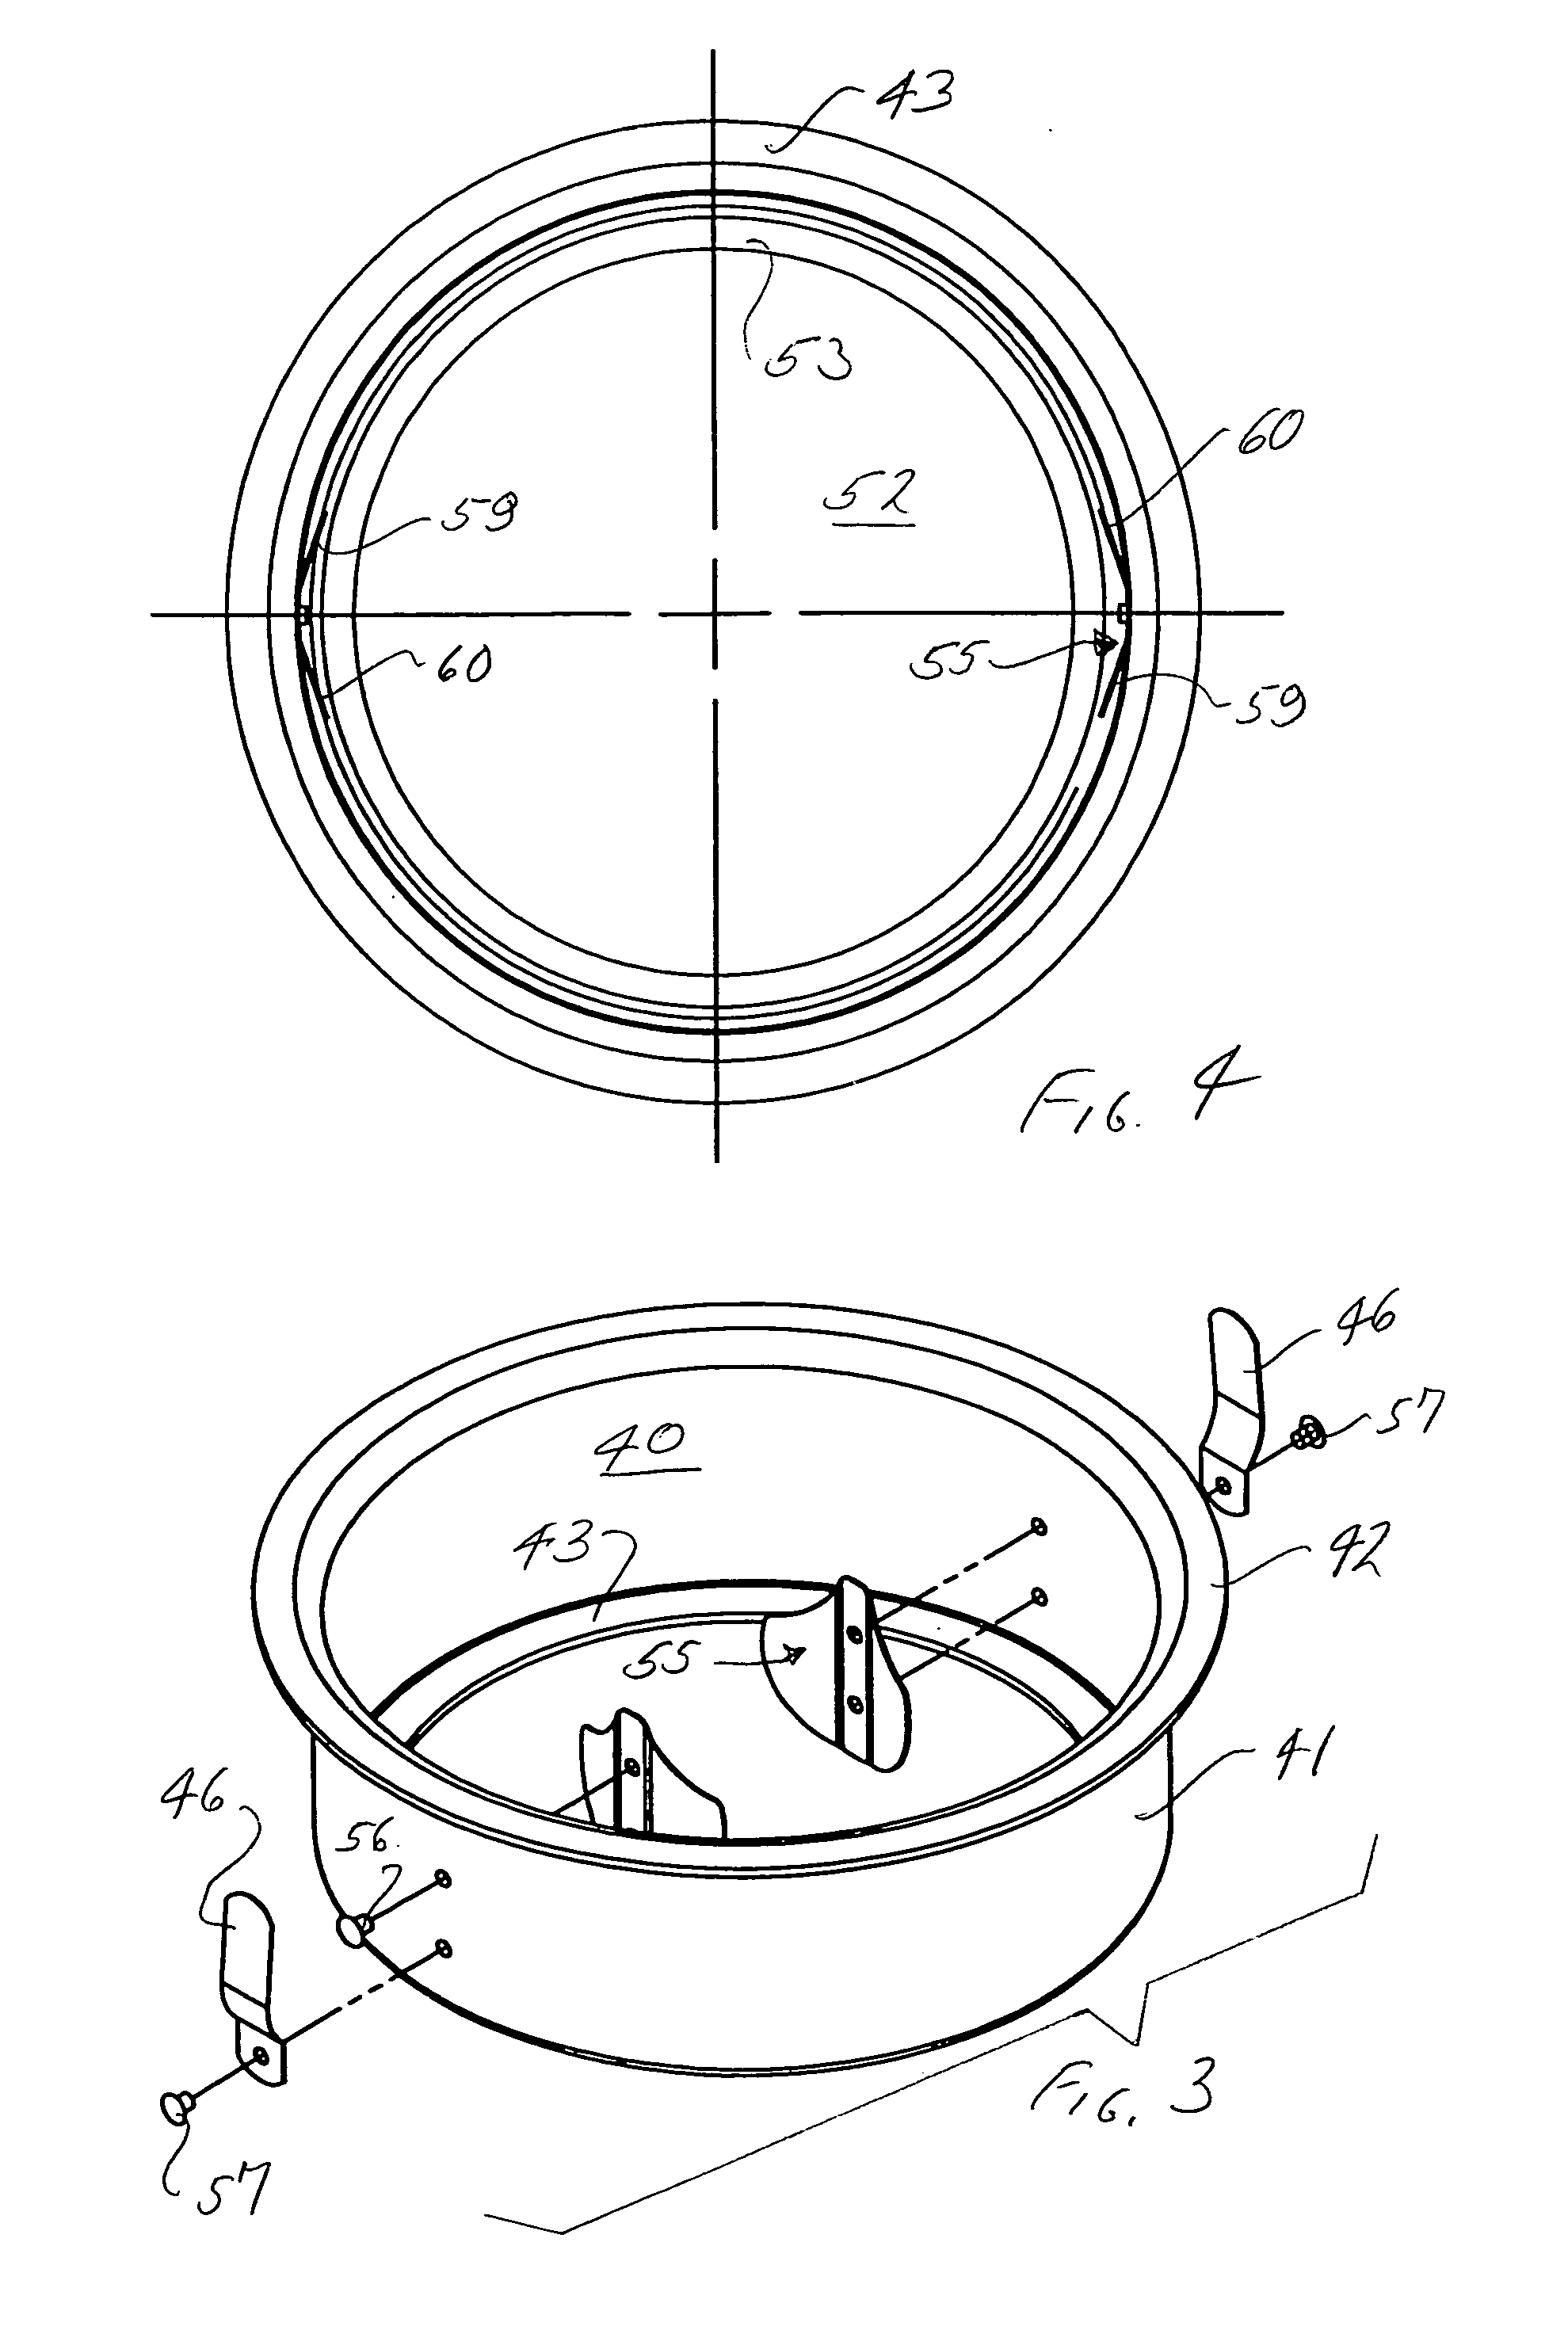 Accessory cartridge for lighting fixture